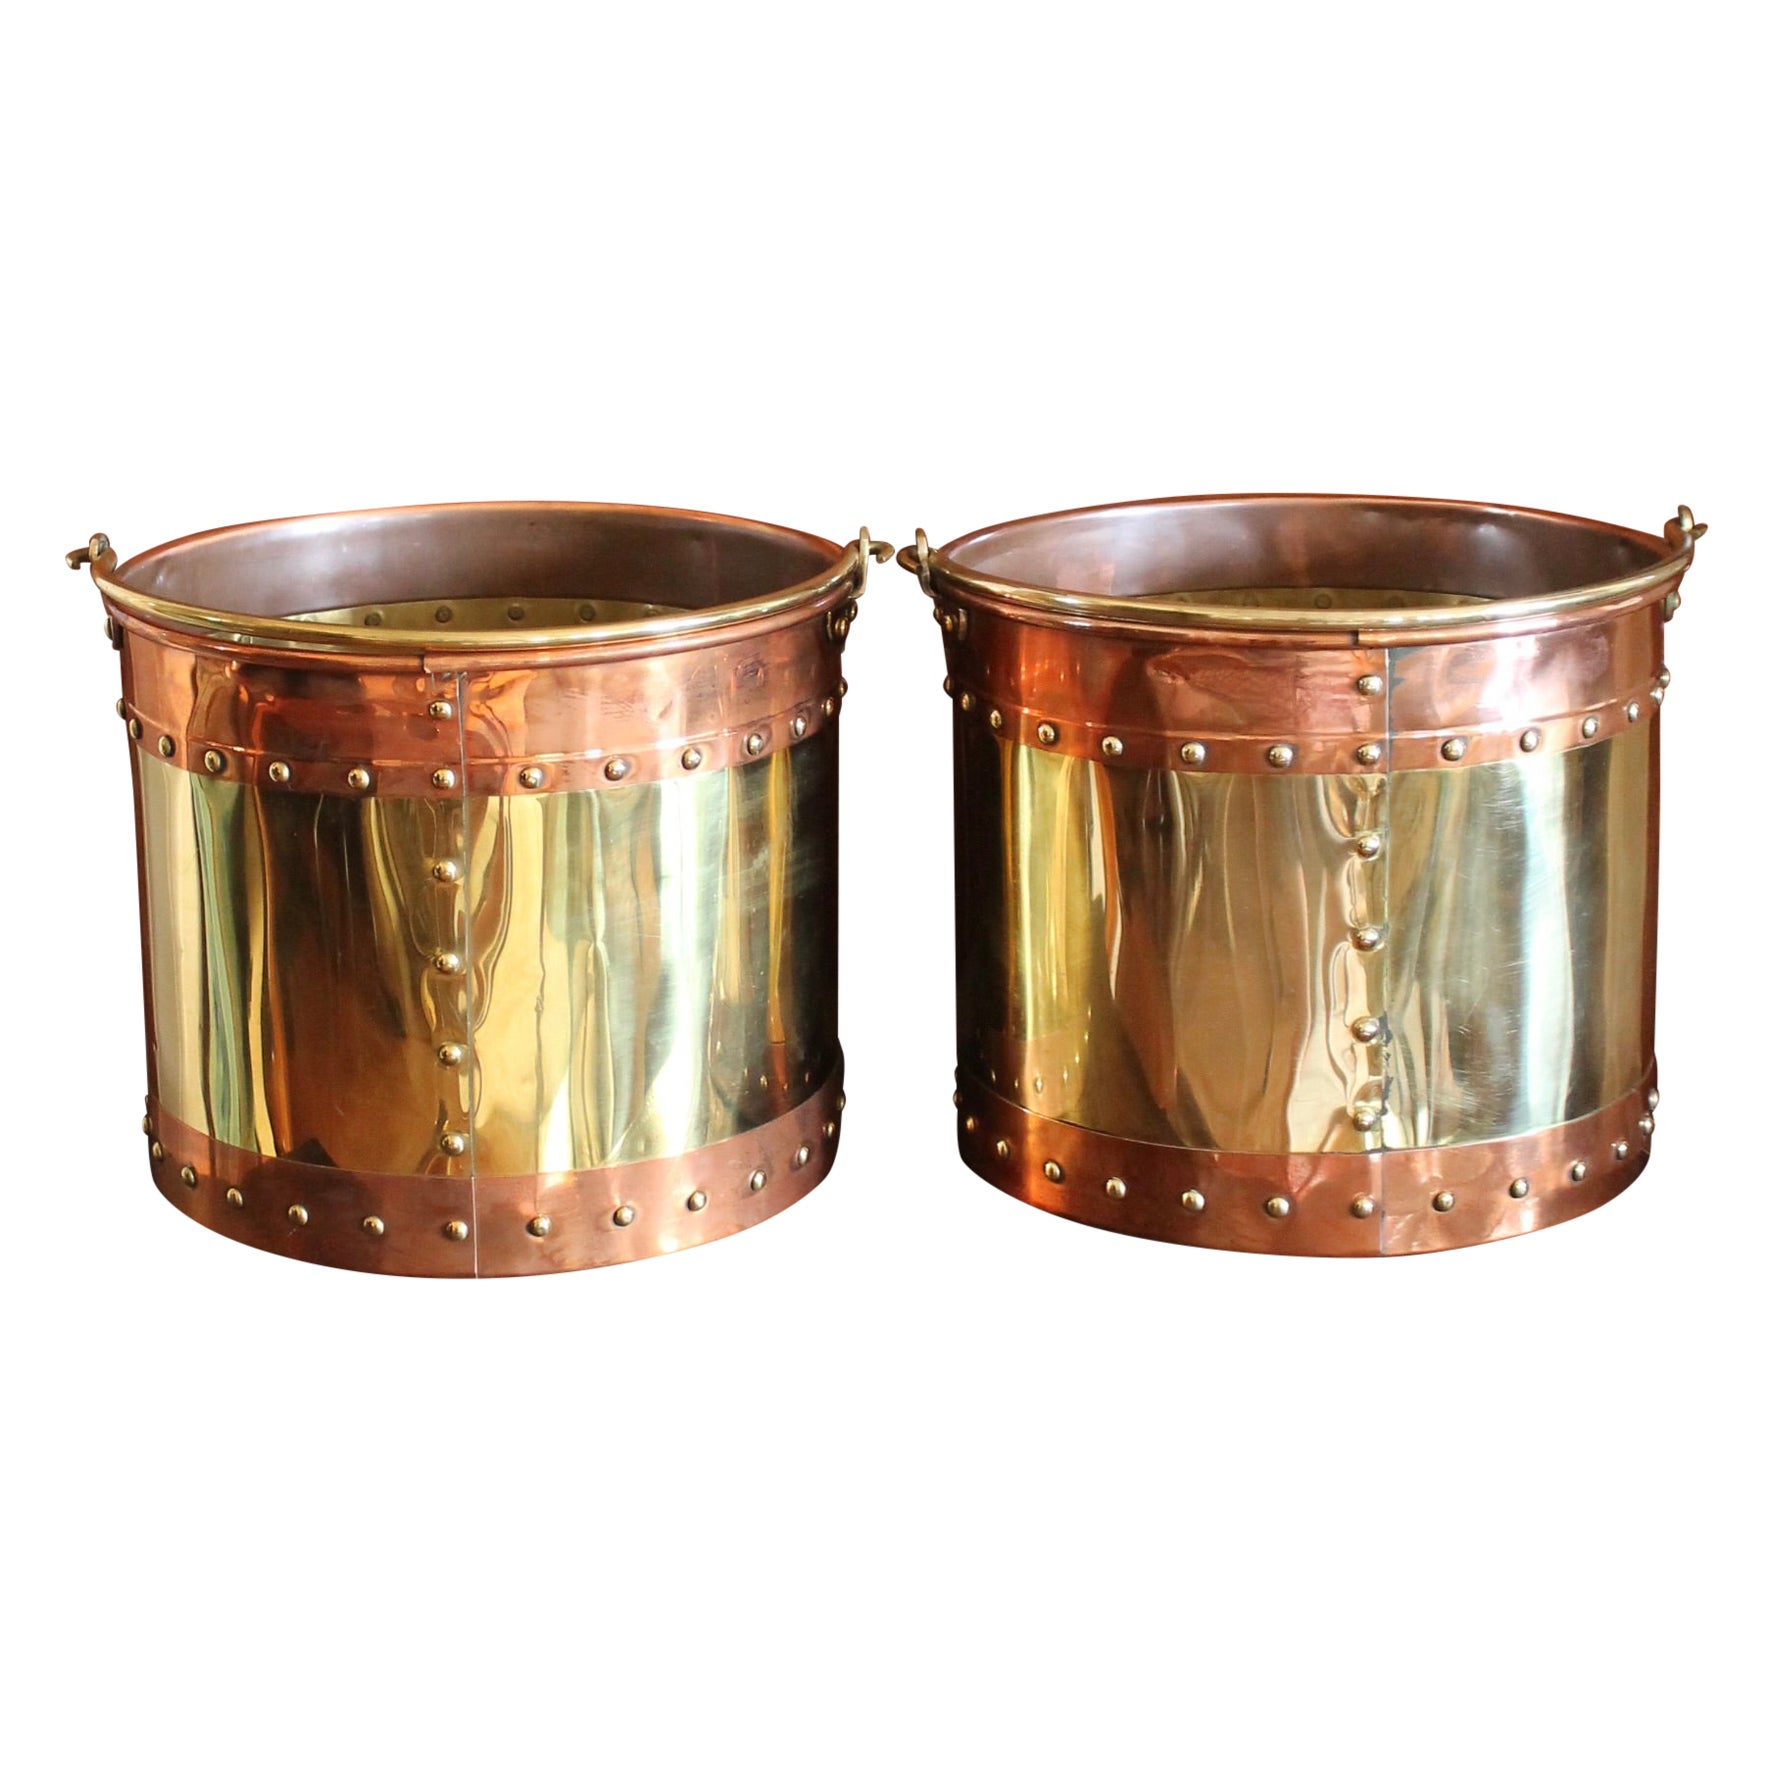 Pair of Large Copper and Brass Studded Kindling Buckets